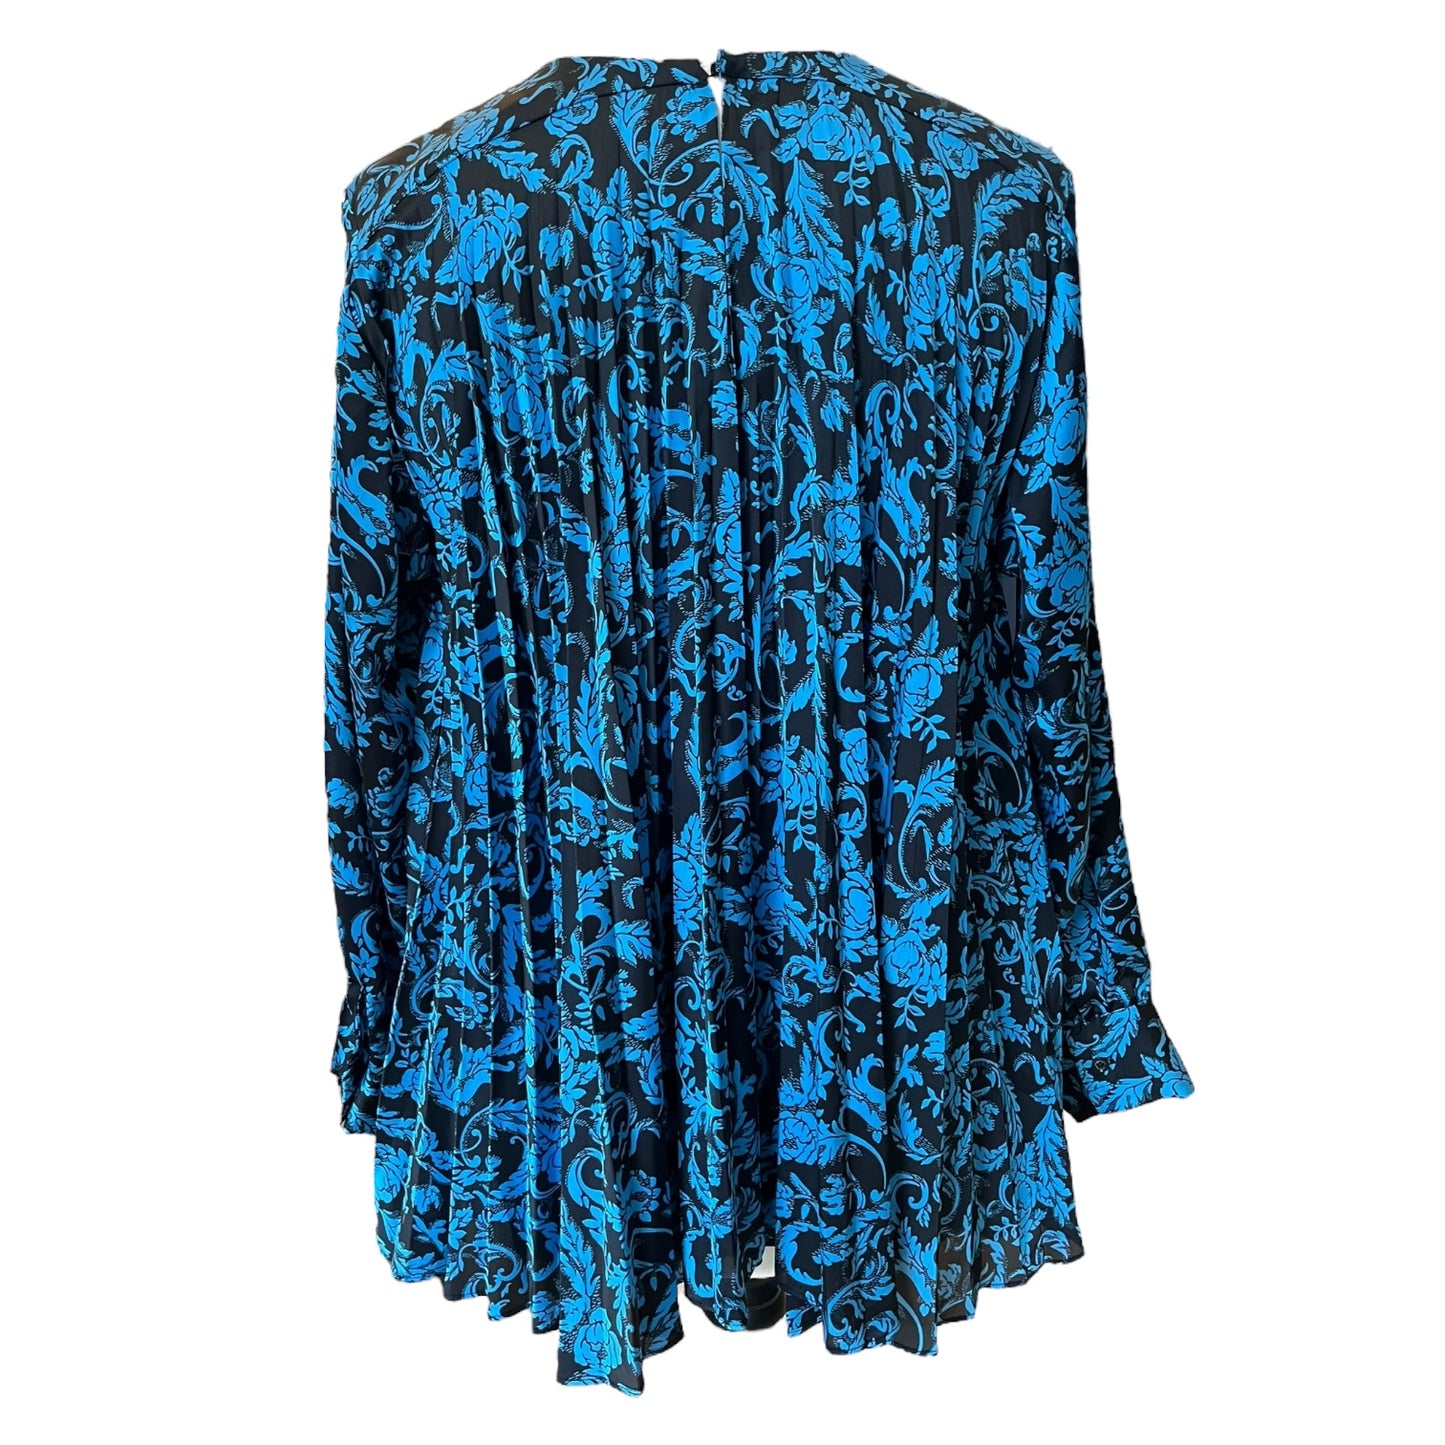 Sandro Blue Patterned Top